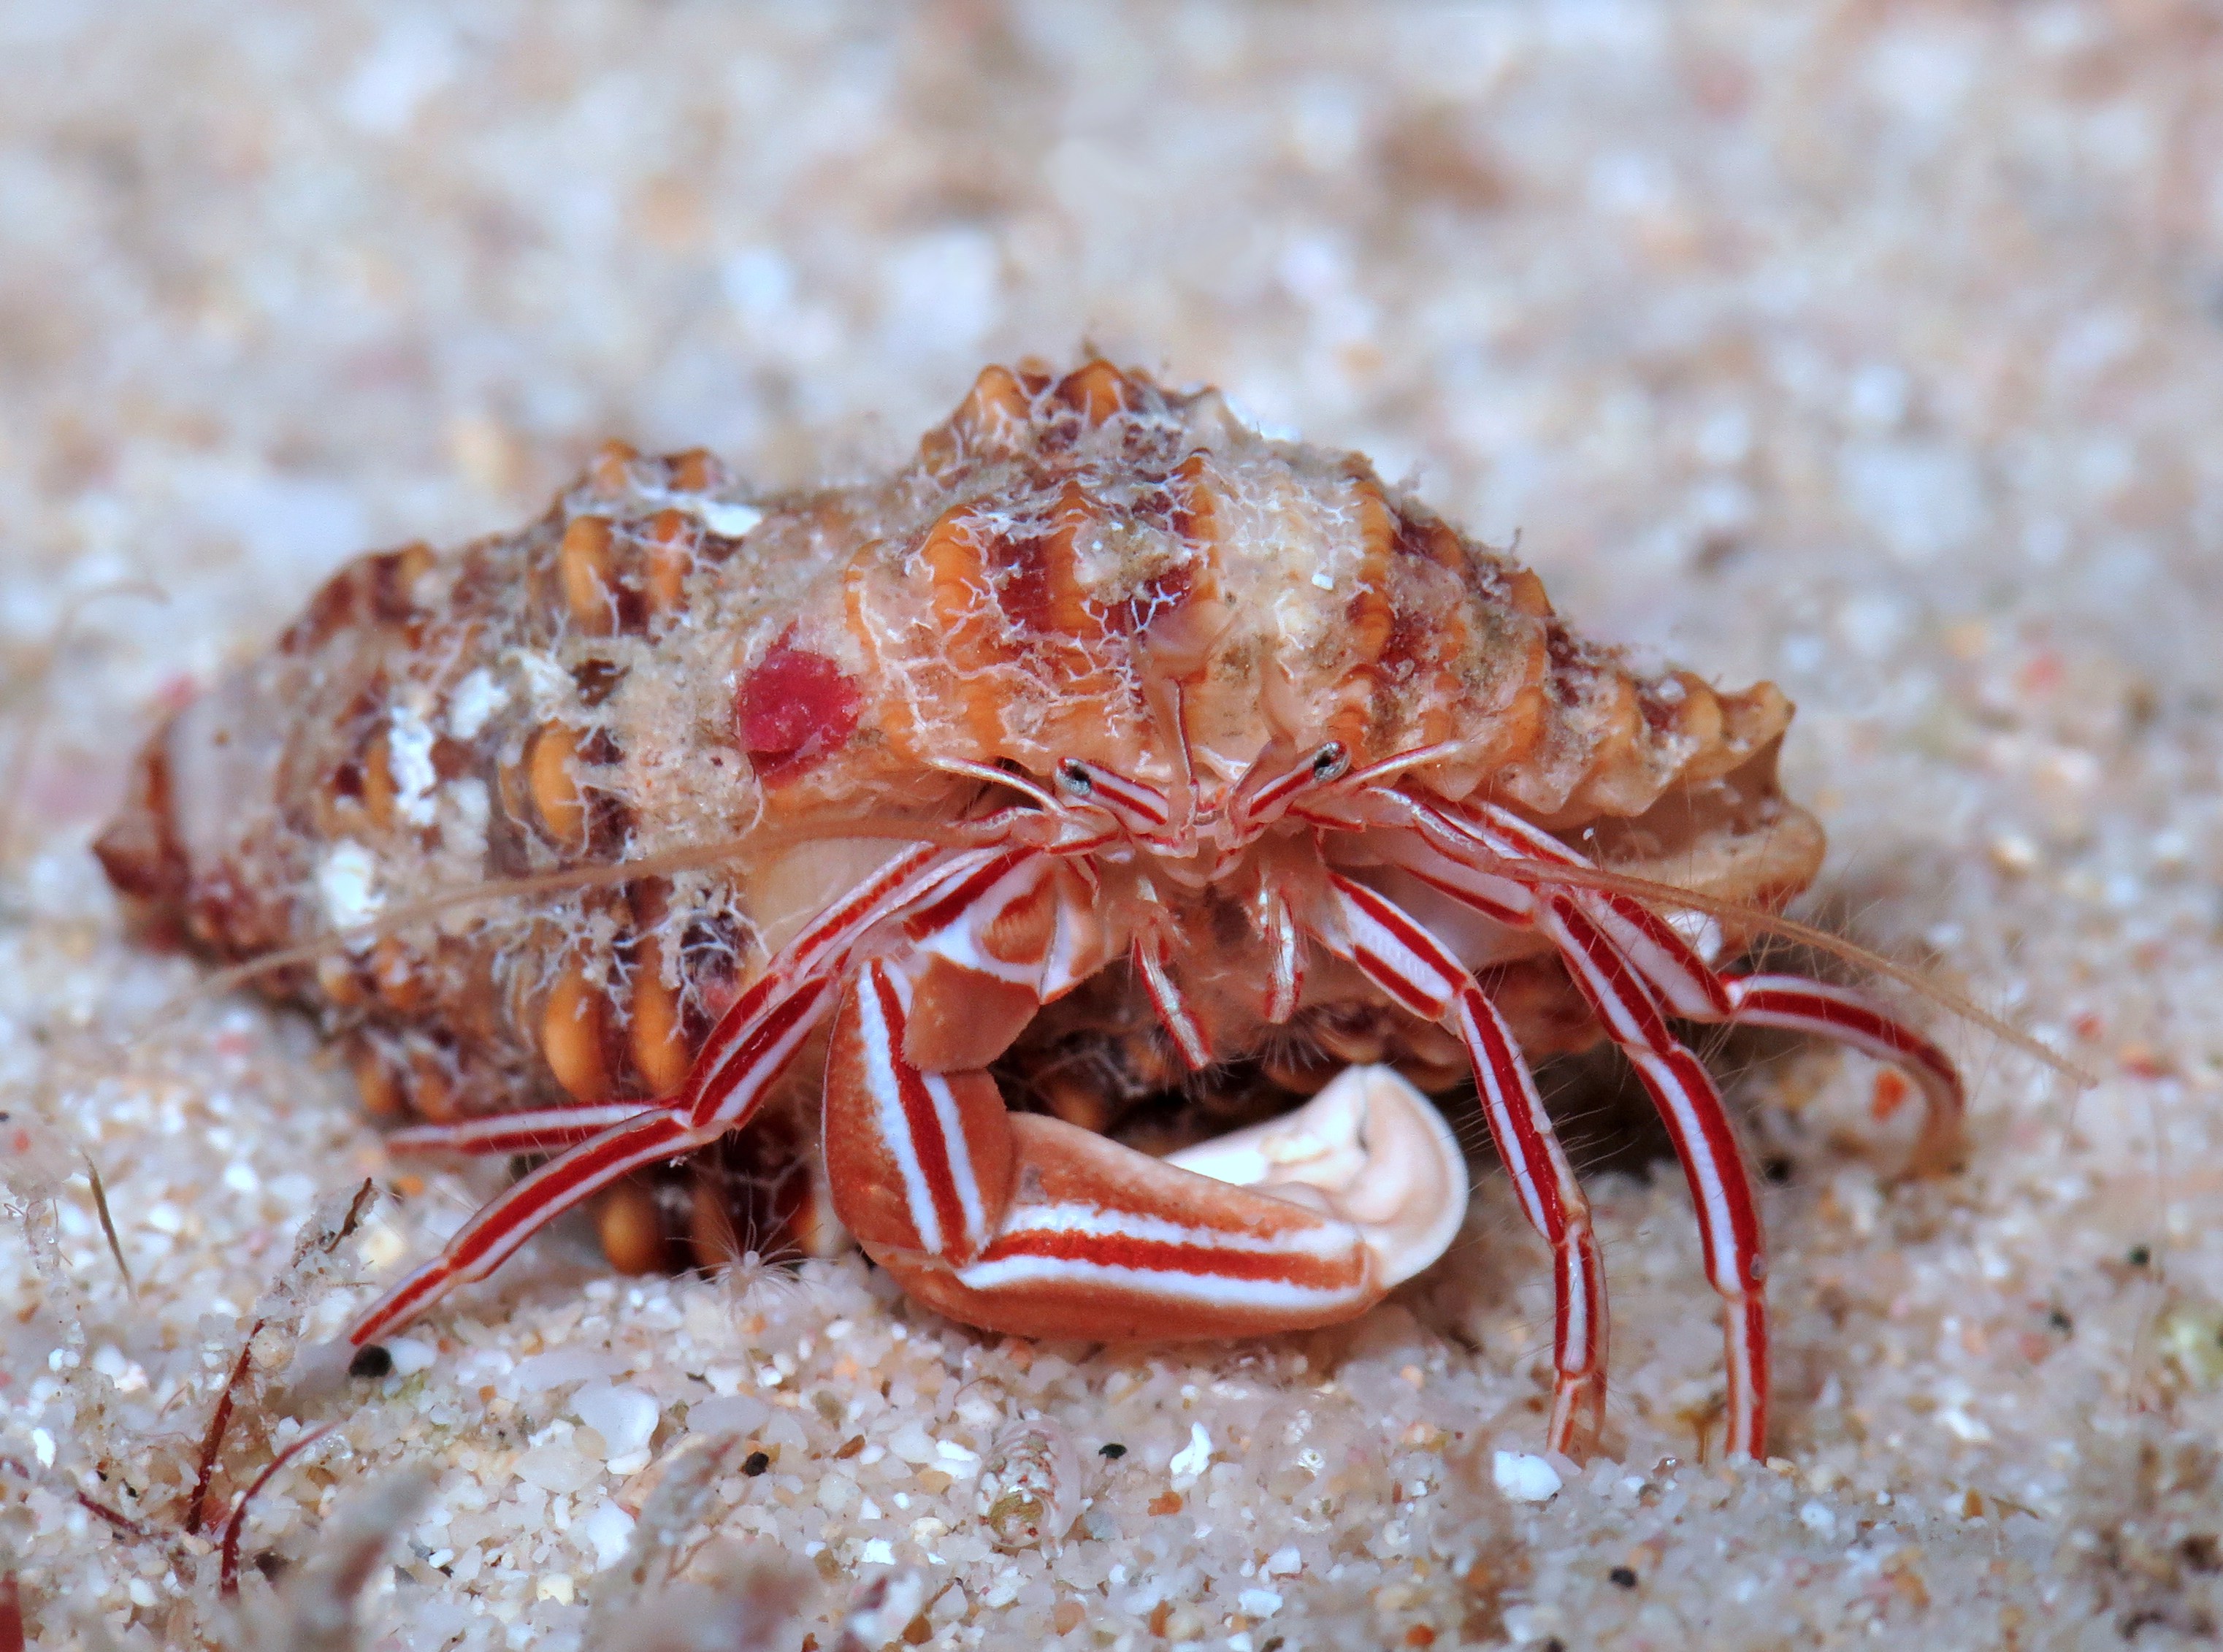 The 'Candy striped hermit crab' is a new species | Pensoft blog